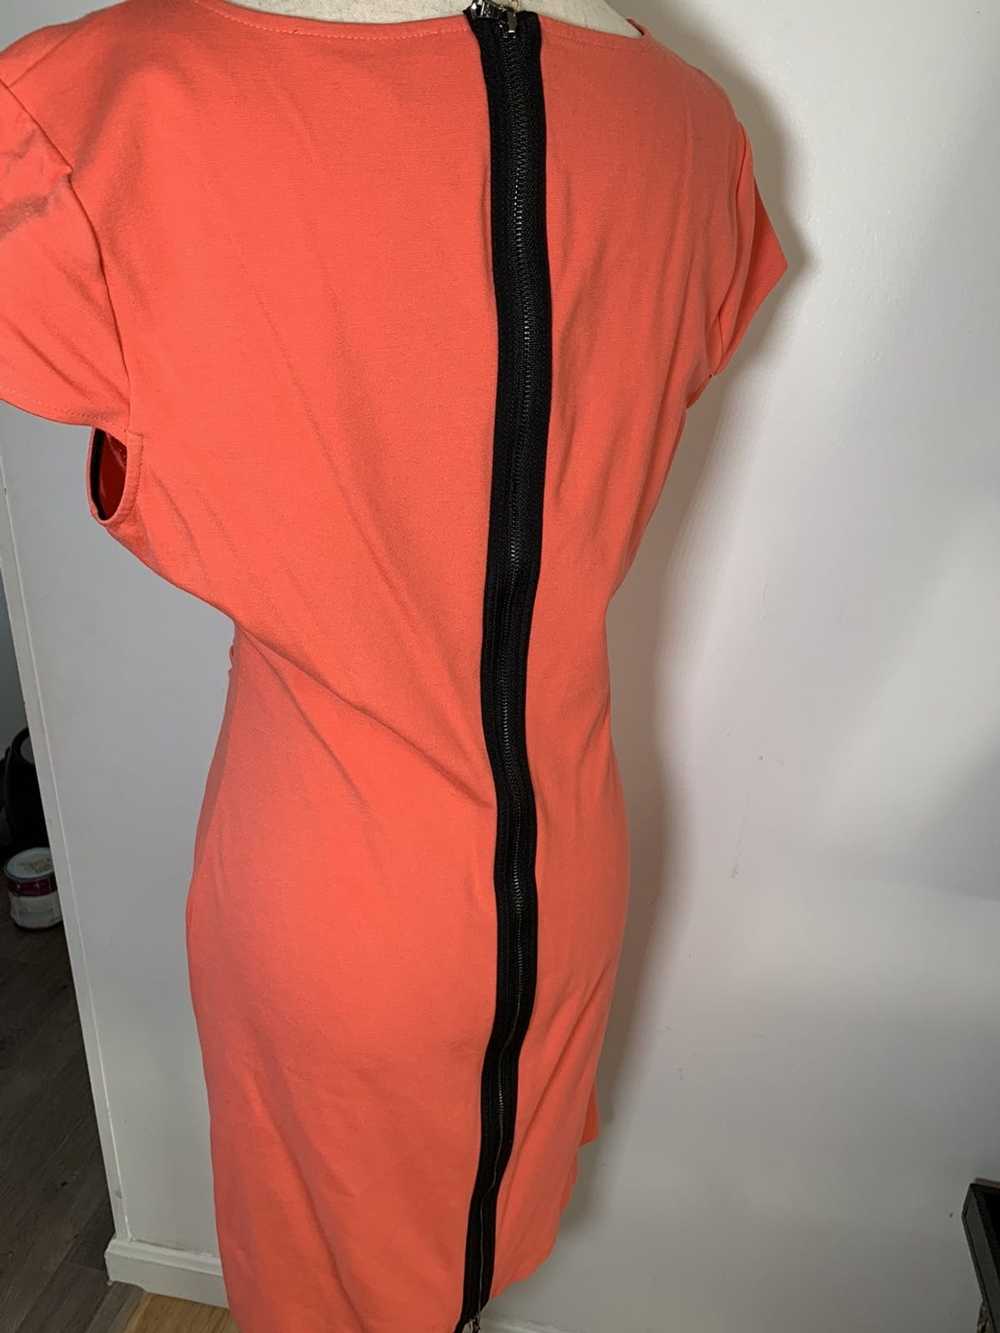 Kenneth Cole Kenneth Cole dress size 6 - image 3